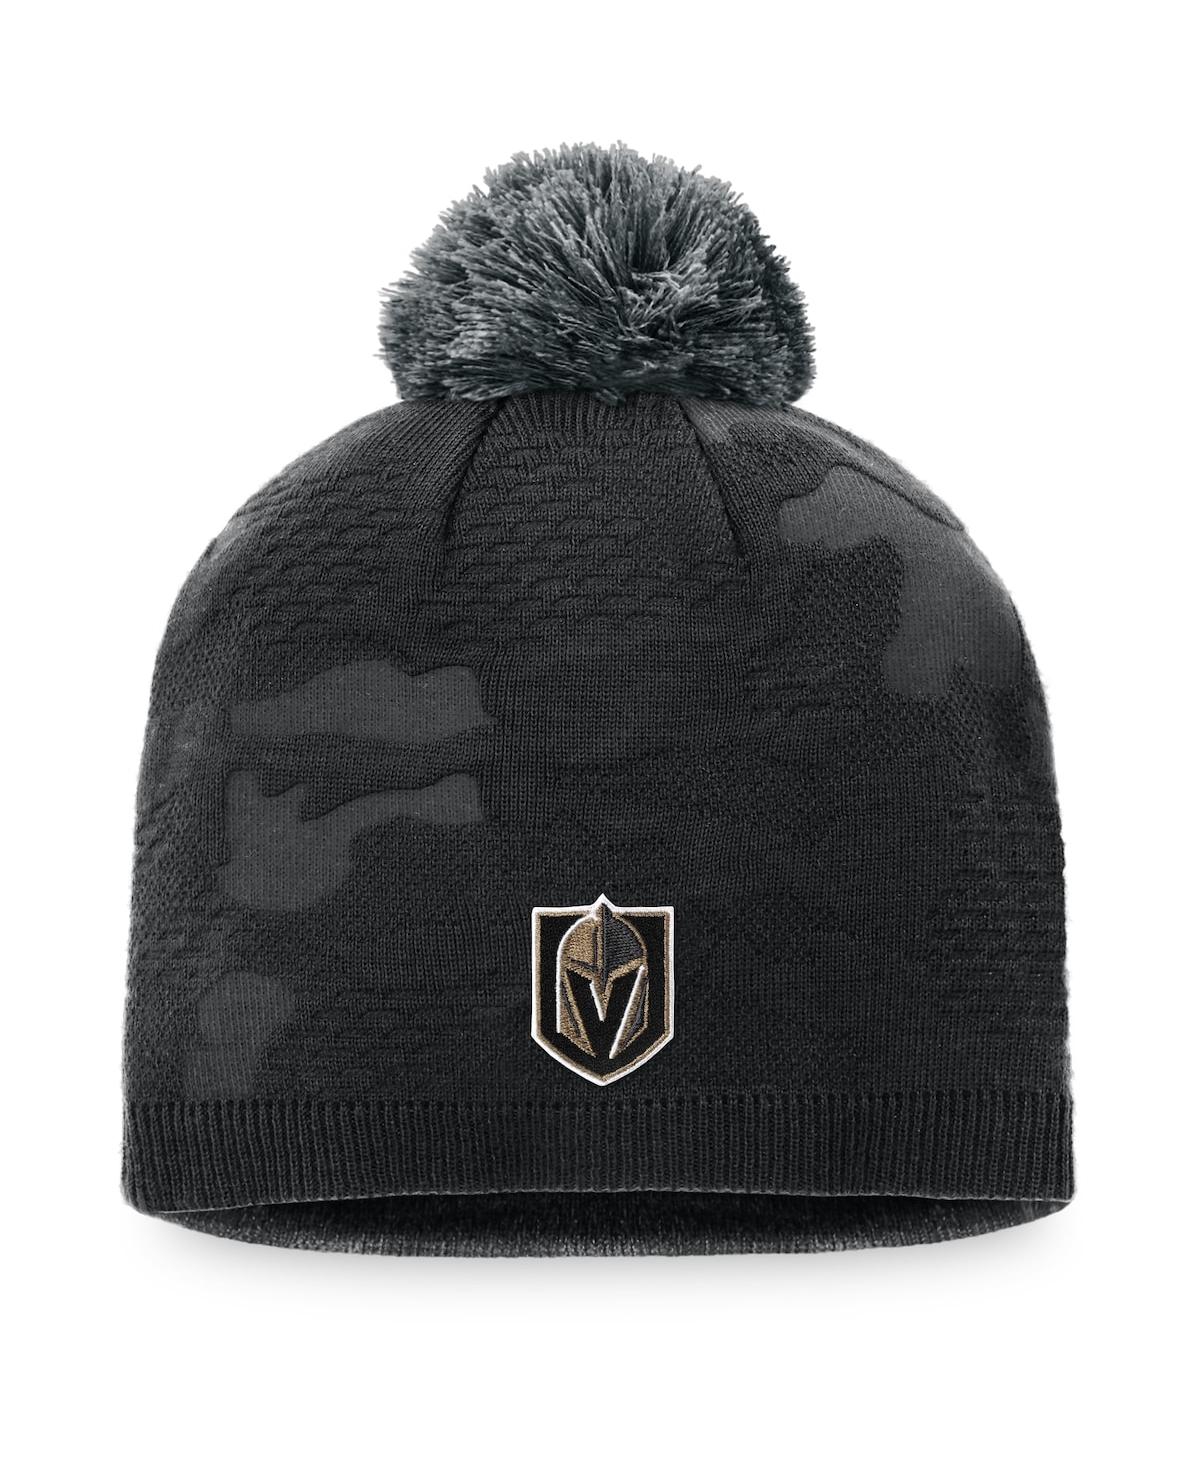 Women's Black and Gray Vegas Golden Knights Authentic Pro Team Locker Room Beanie with Pom - Black, Gray